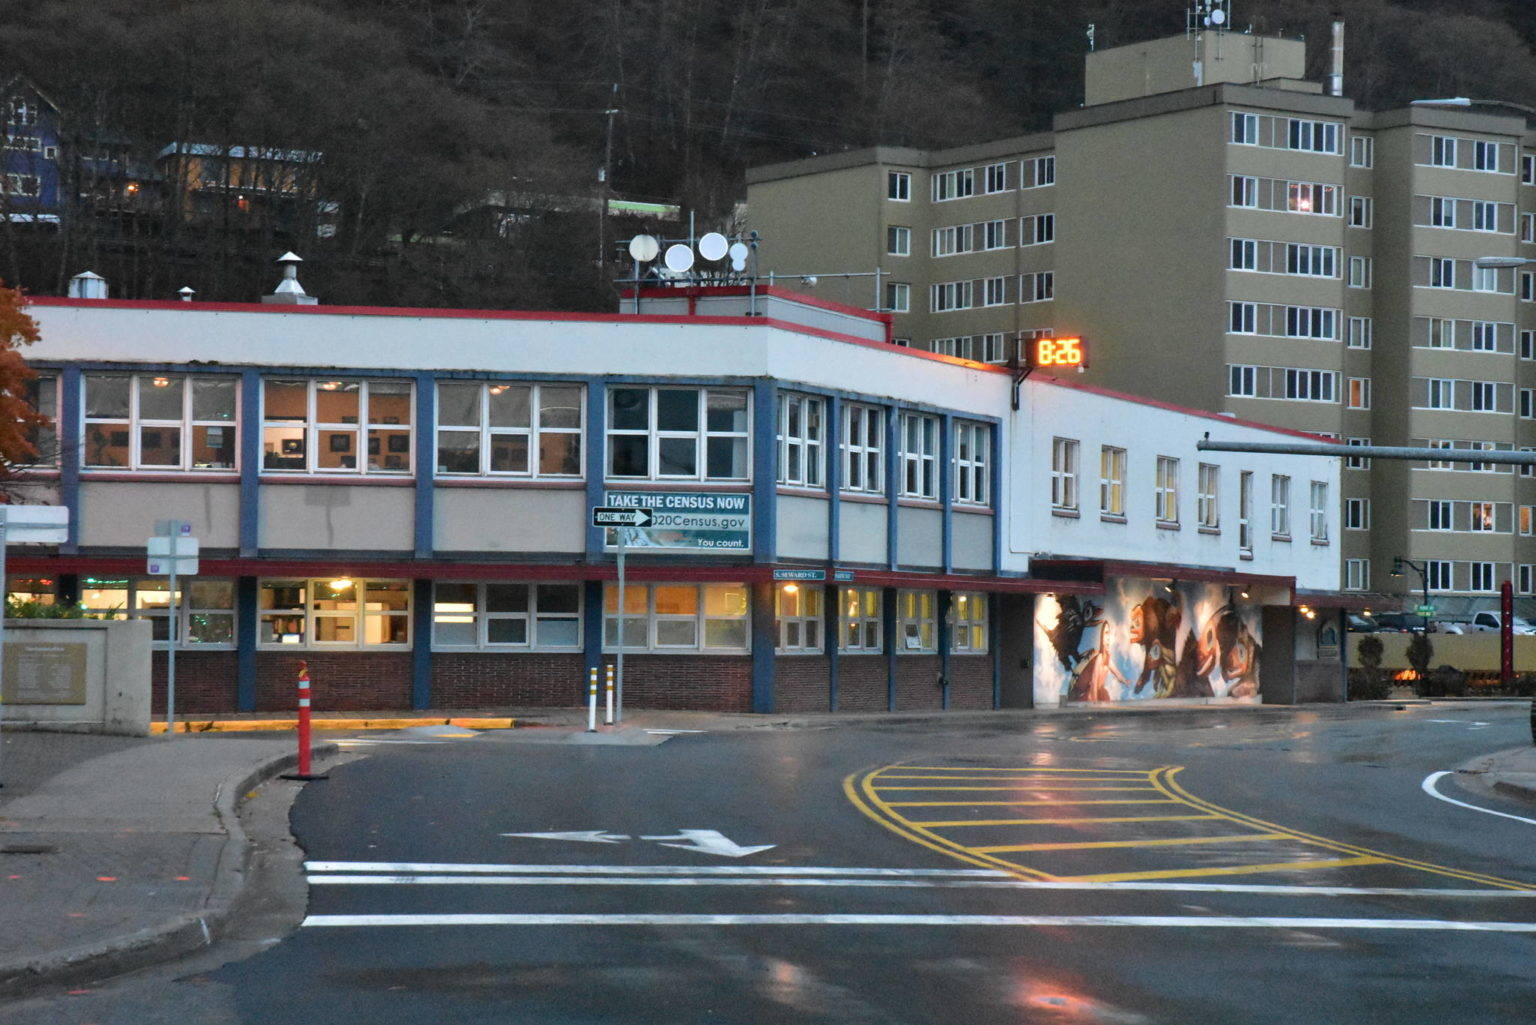 Juneau City Hall on October 24, 2020. At Monday’s Public Works and Facilities Committee meeting, members discussed options for moving forward with a new city hall building. (Peter Segall / Juneau Empire File)